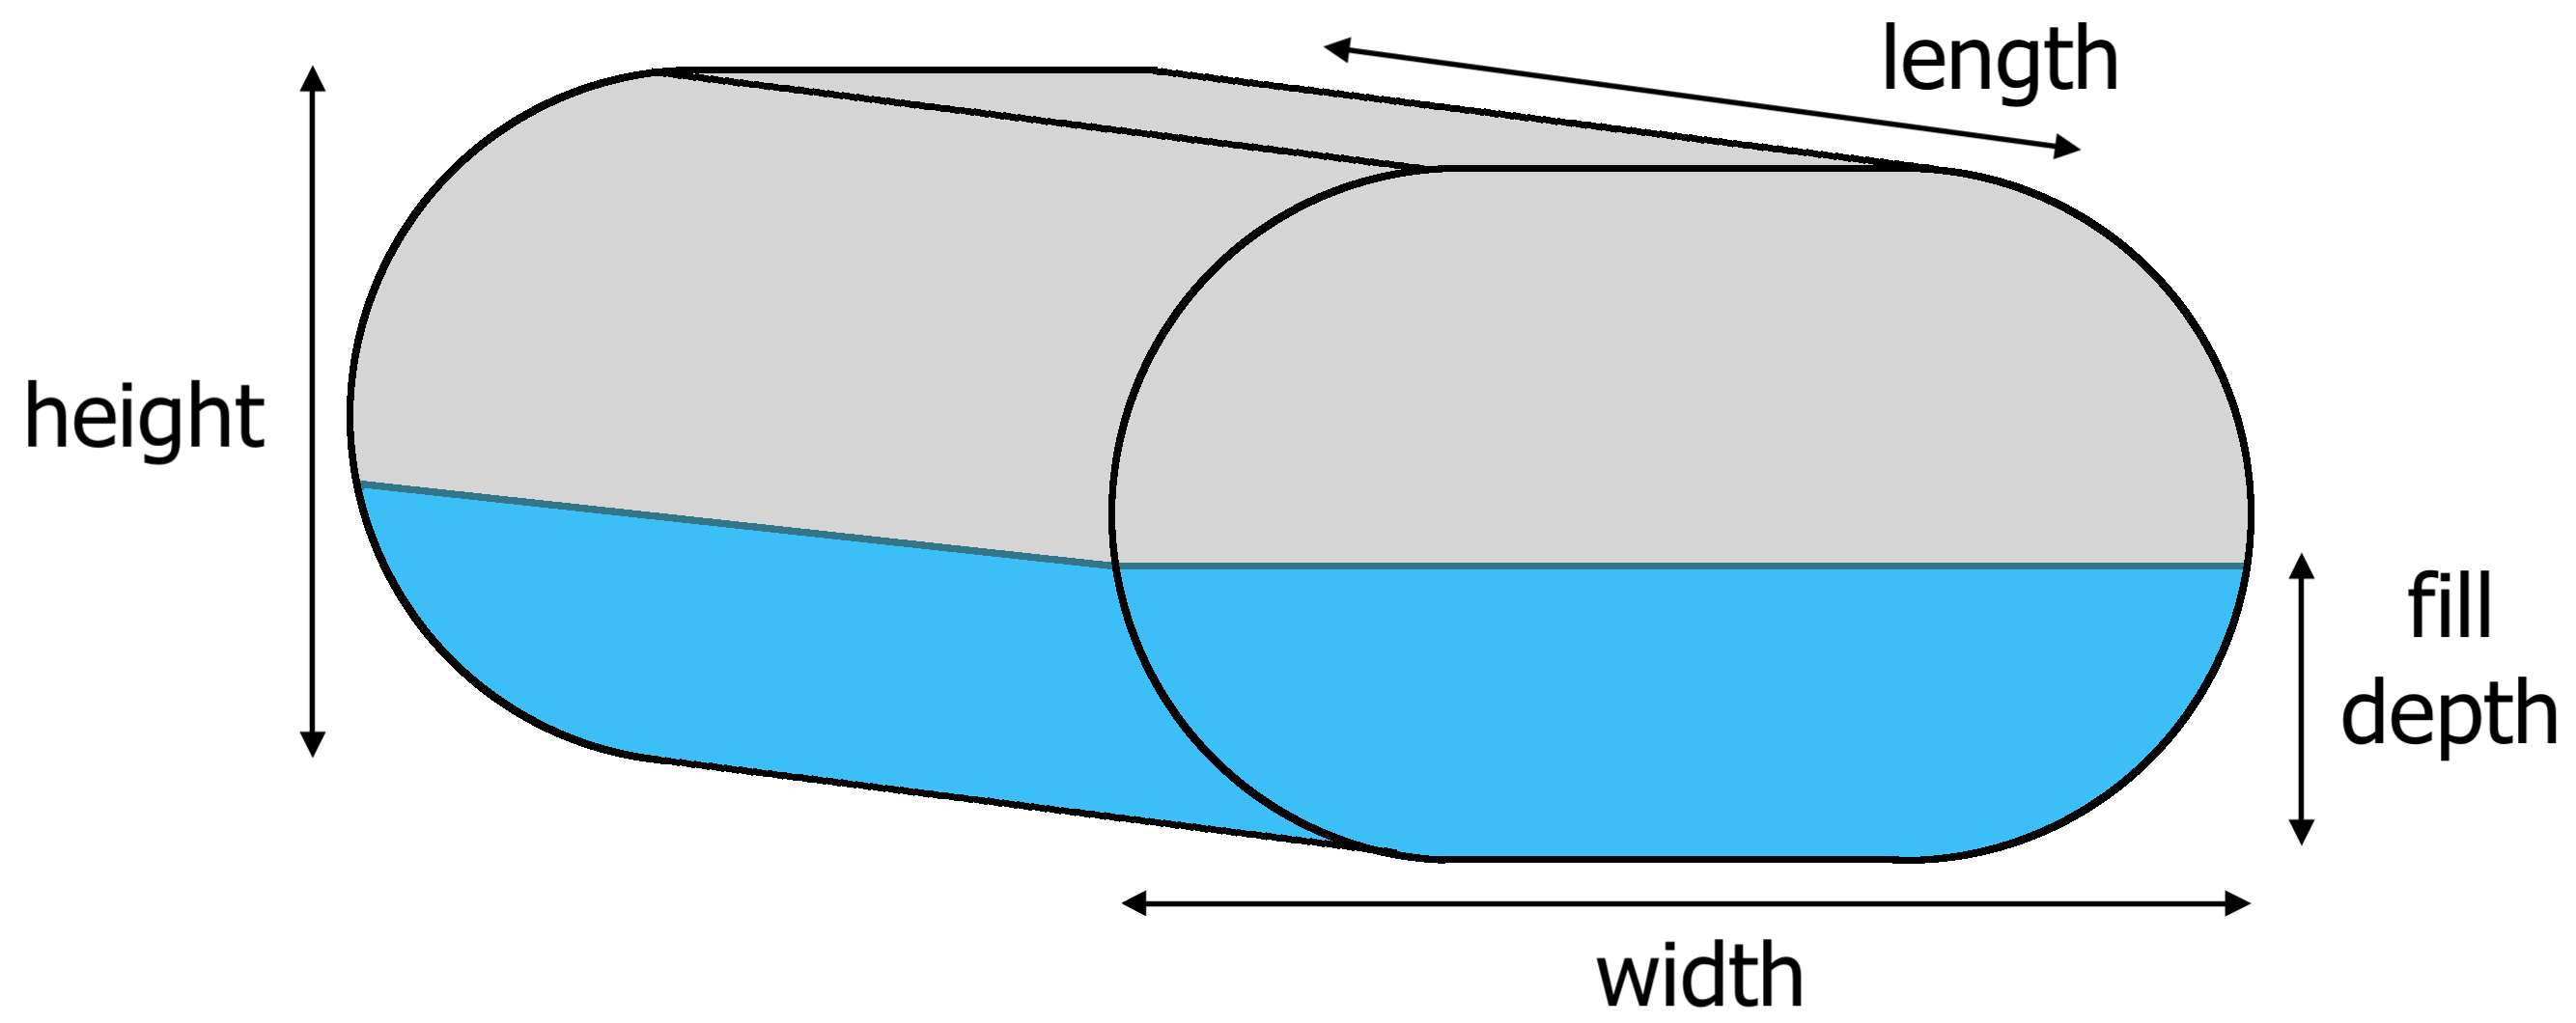 horizontal oval tank diagram showing length, width, height, and fill depth dimensions